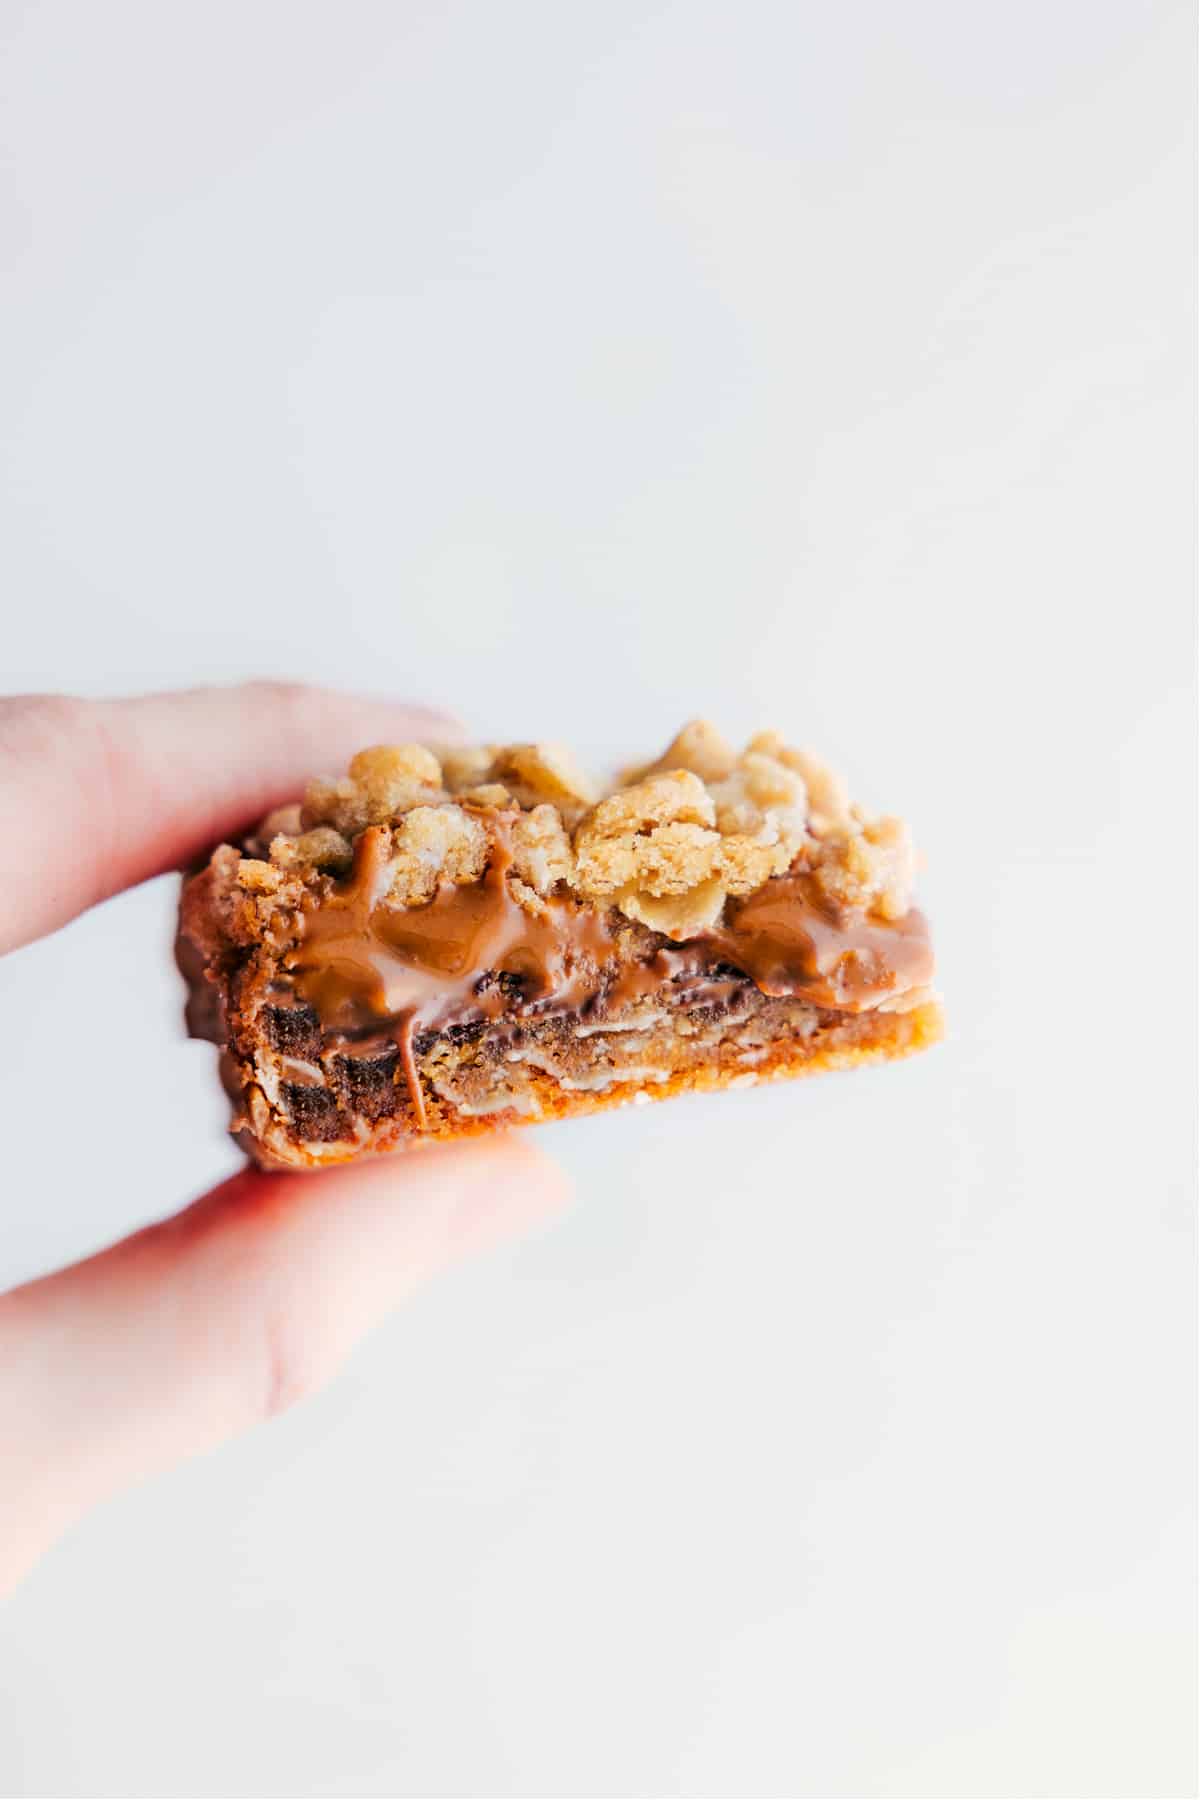 A cookie butter bar being held up showing the gooey and delicious center.